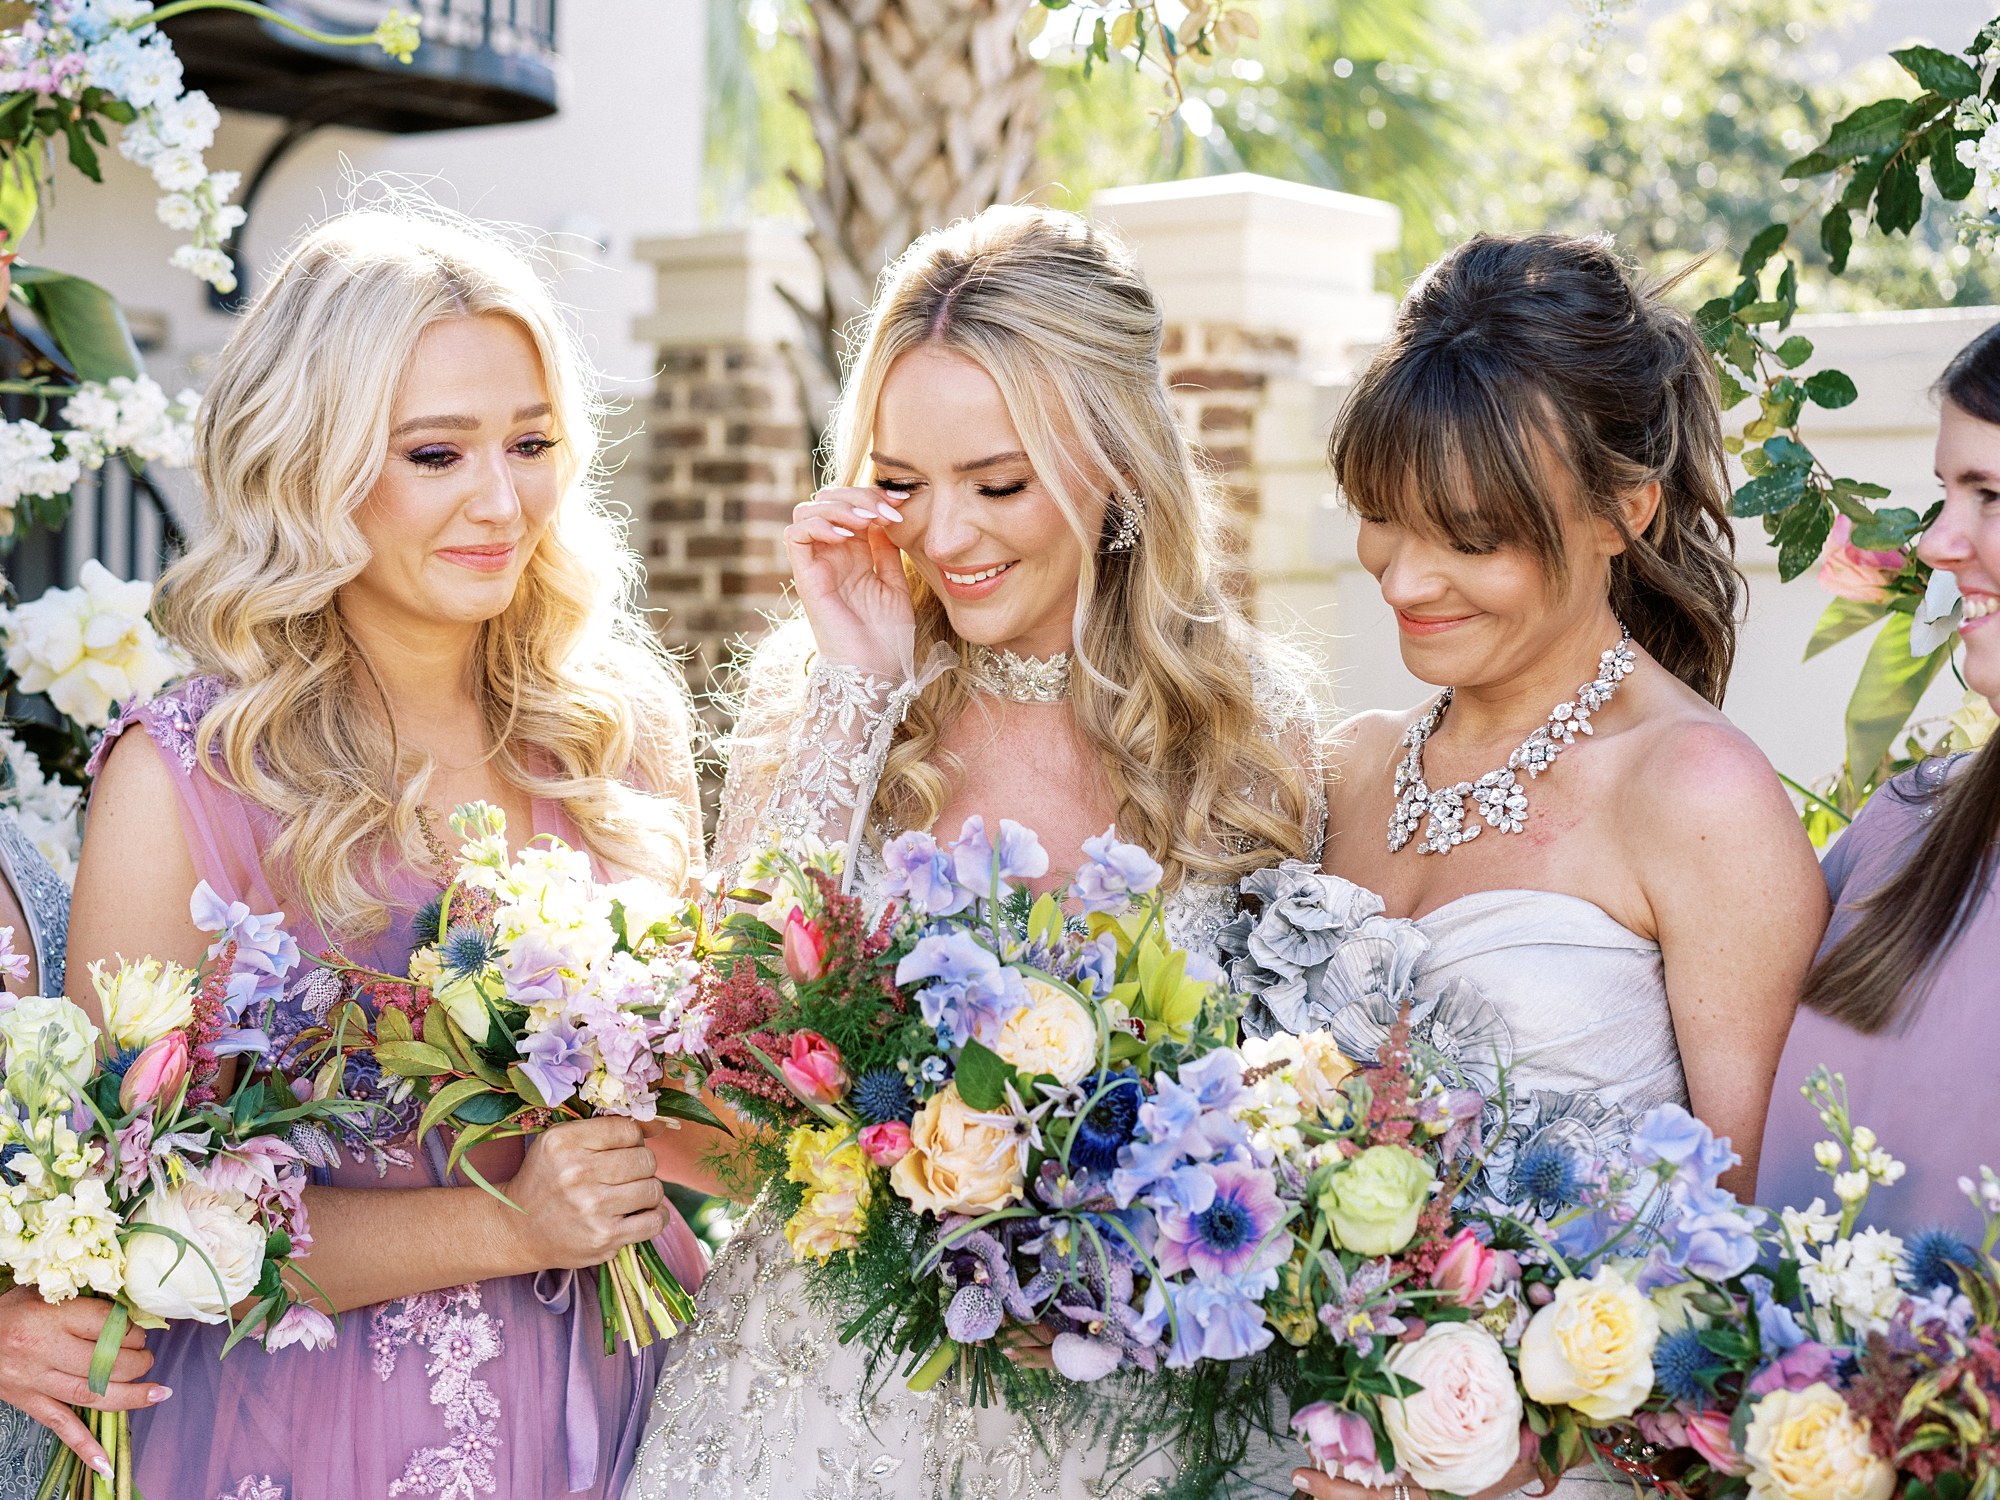 A very fashionable bride wiping a tear away with her bridesmaids crying too at her Charleston wedding